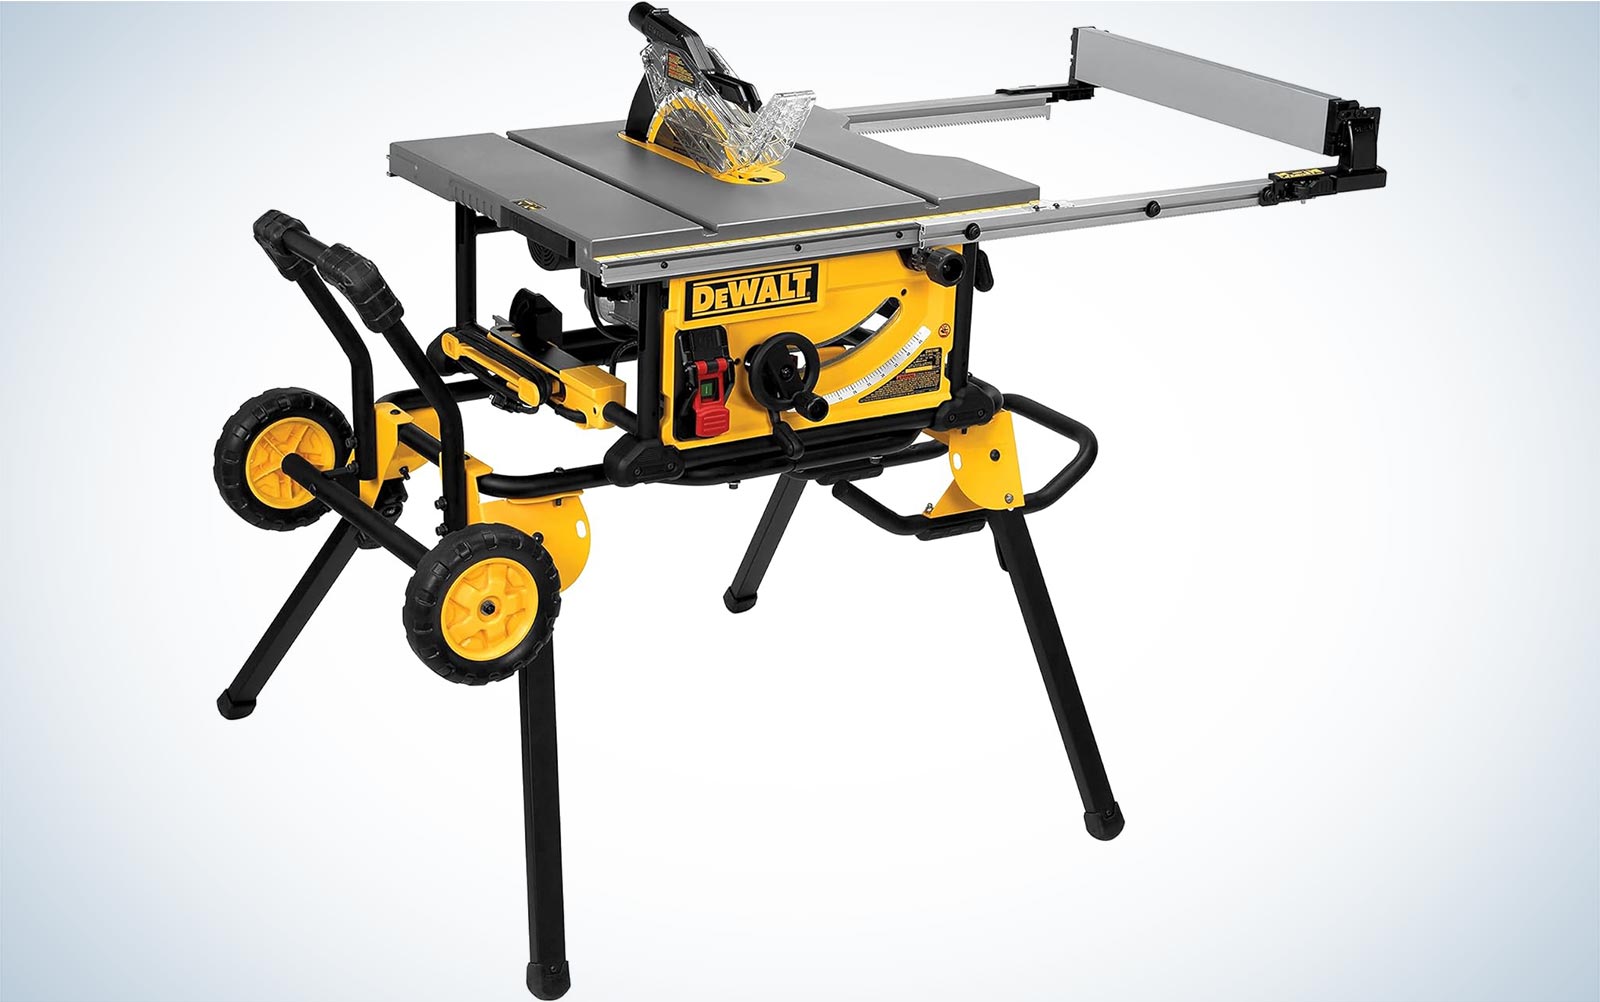 The DeWalt DWE7491RS 10-Inch Table Saw with its legs extended on a plain background